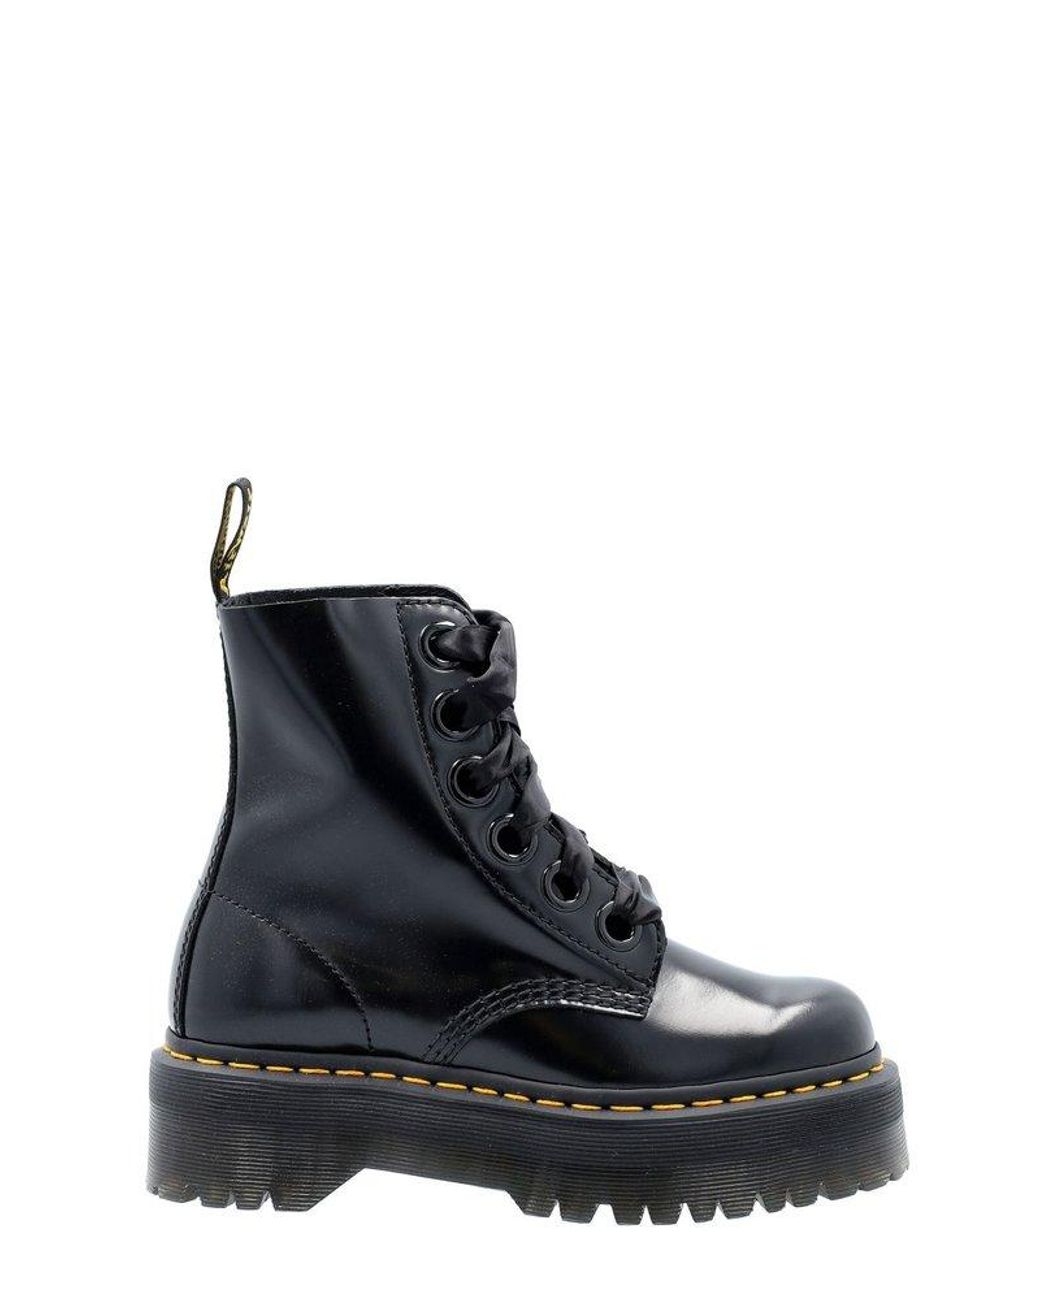 Dr. Martens Molly Platform Lace-up Boots in Black | Lyst Canada